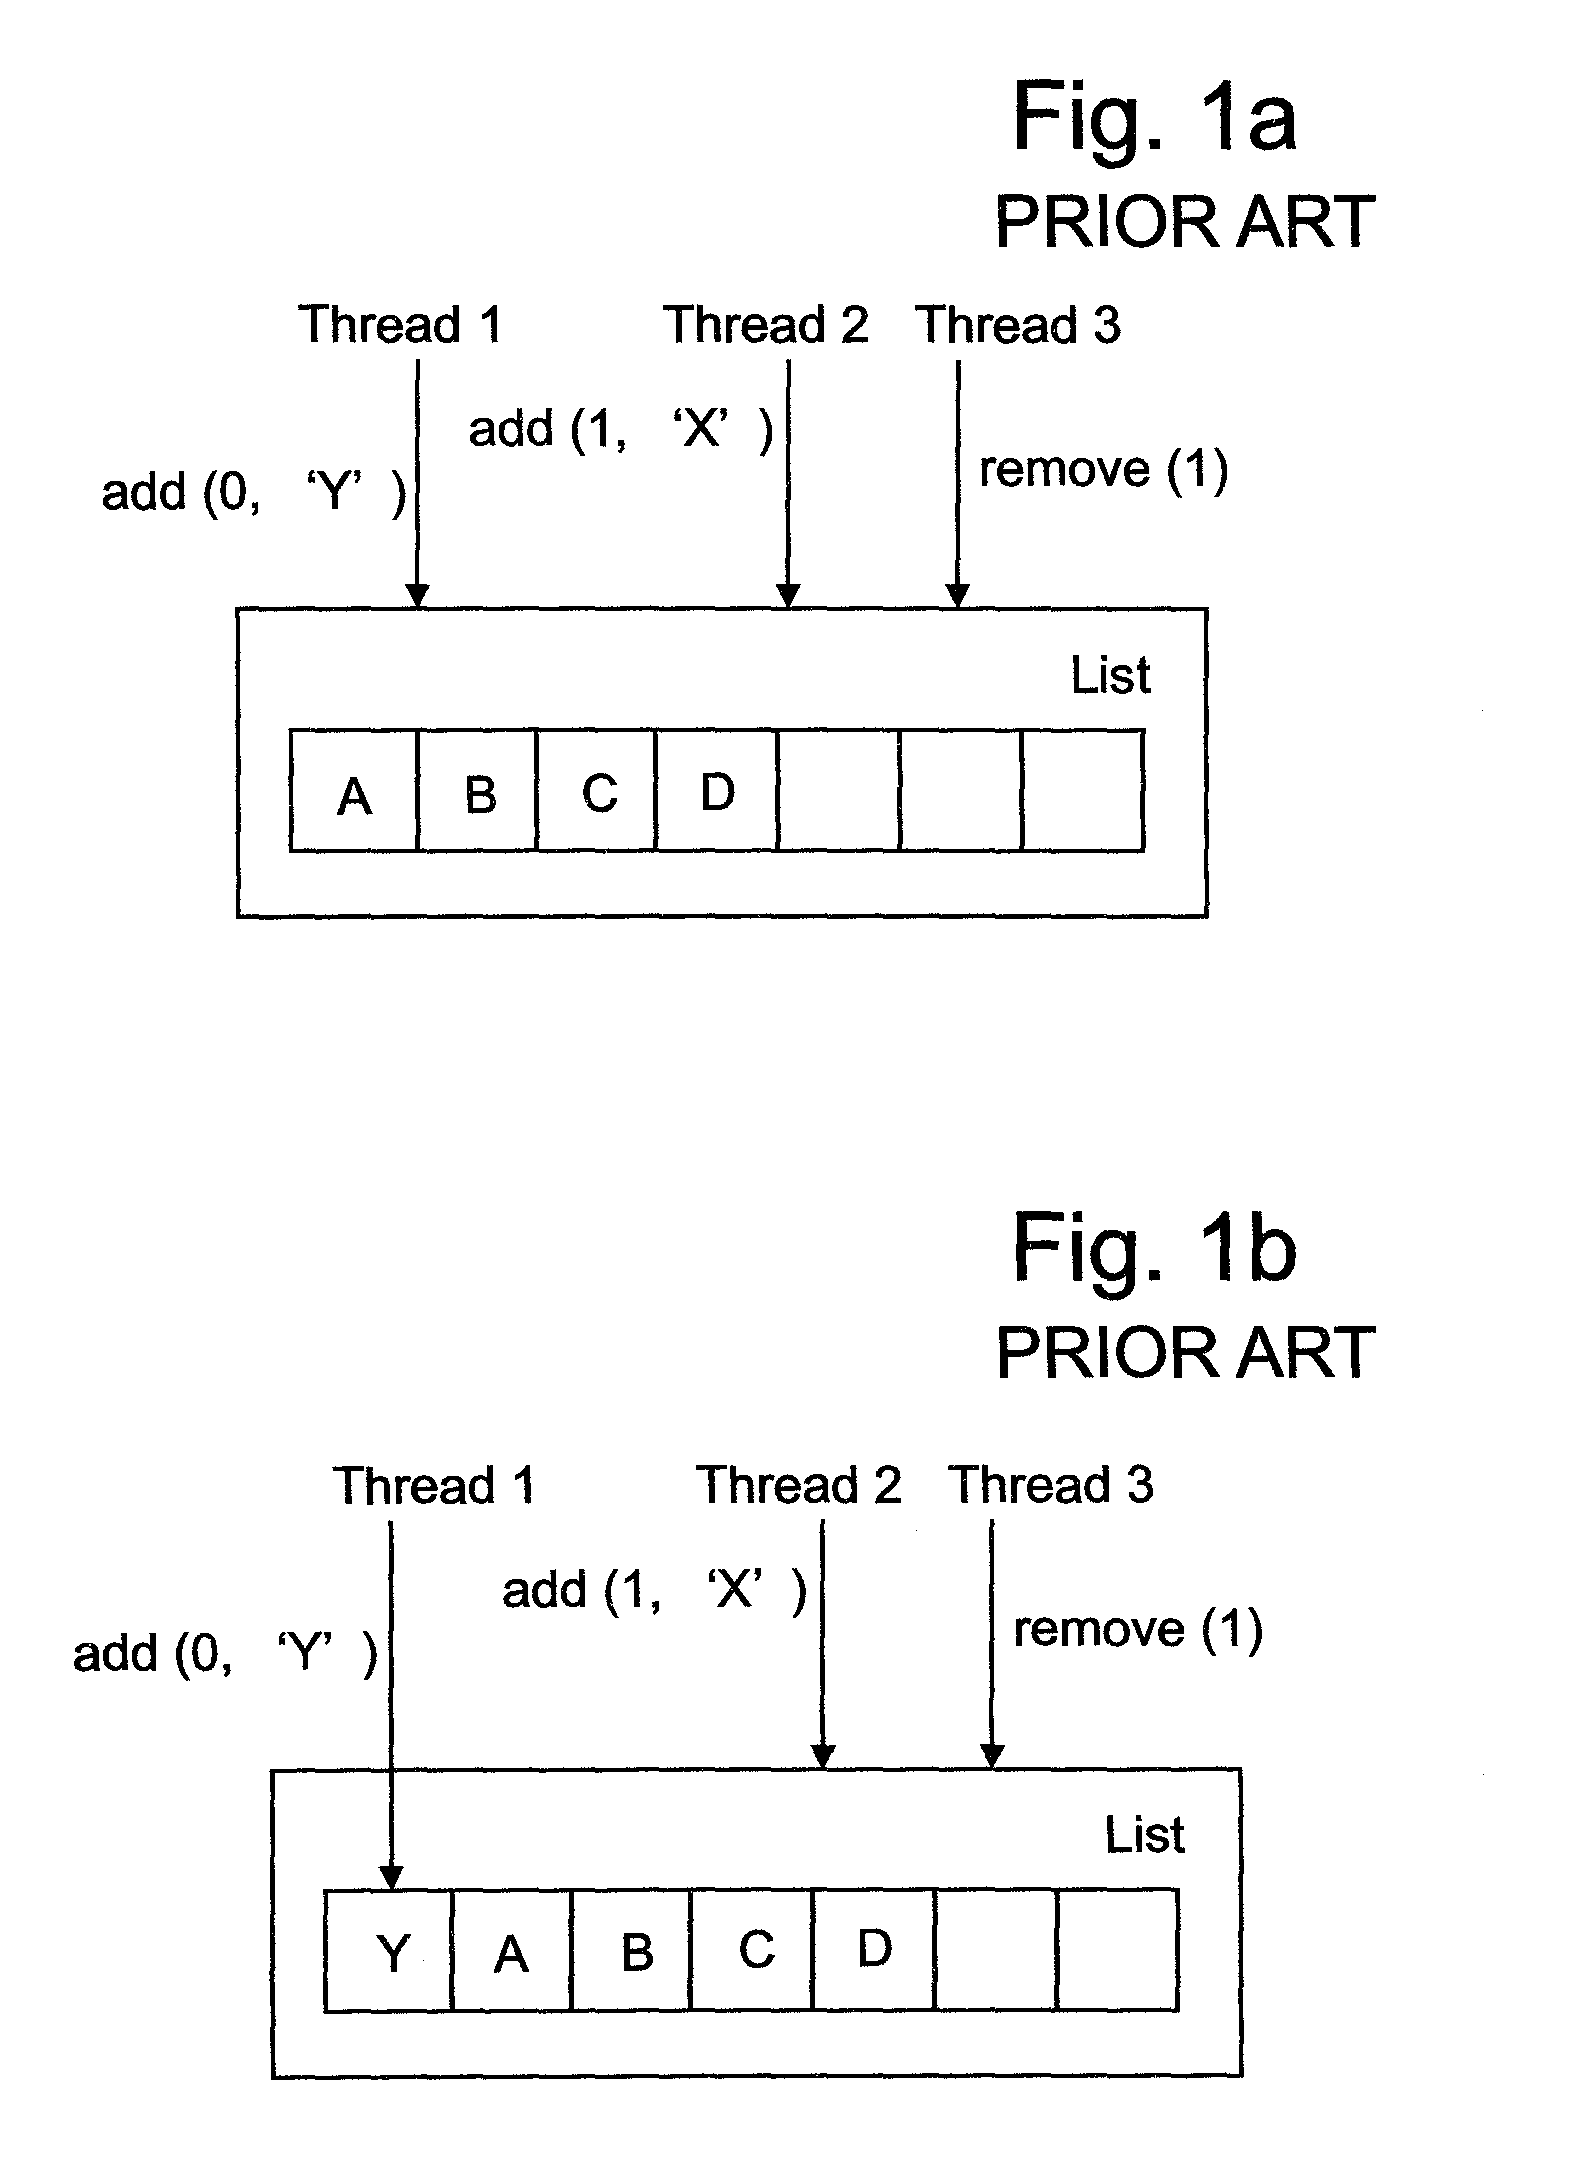 Method and apparatus for accessing a shared data structure in parallel by multiple threads